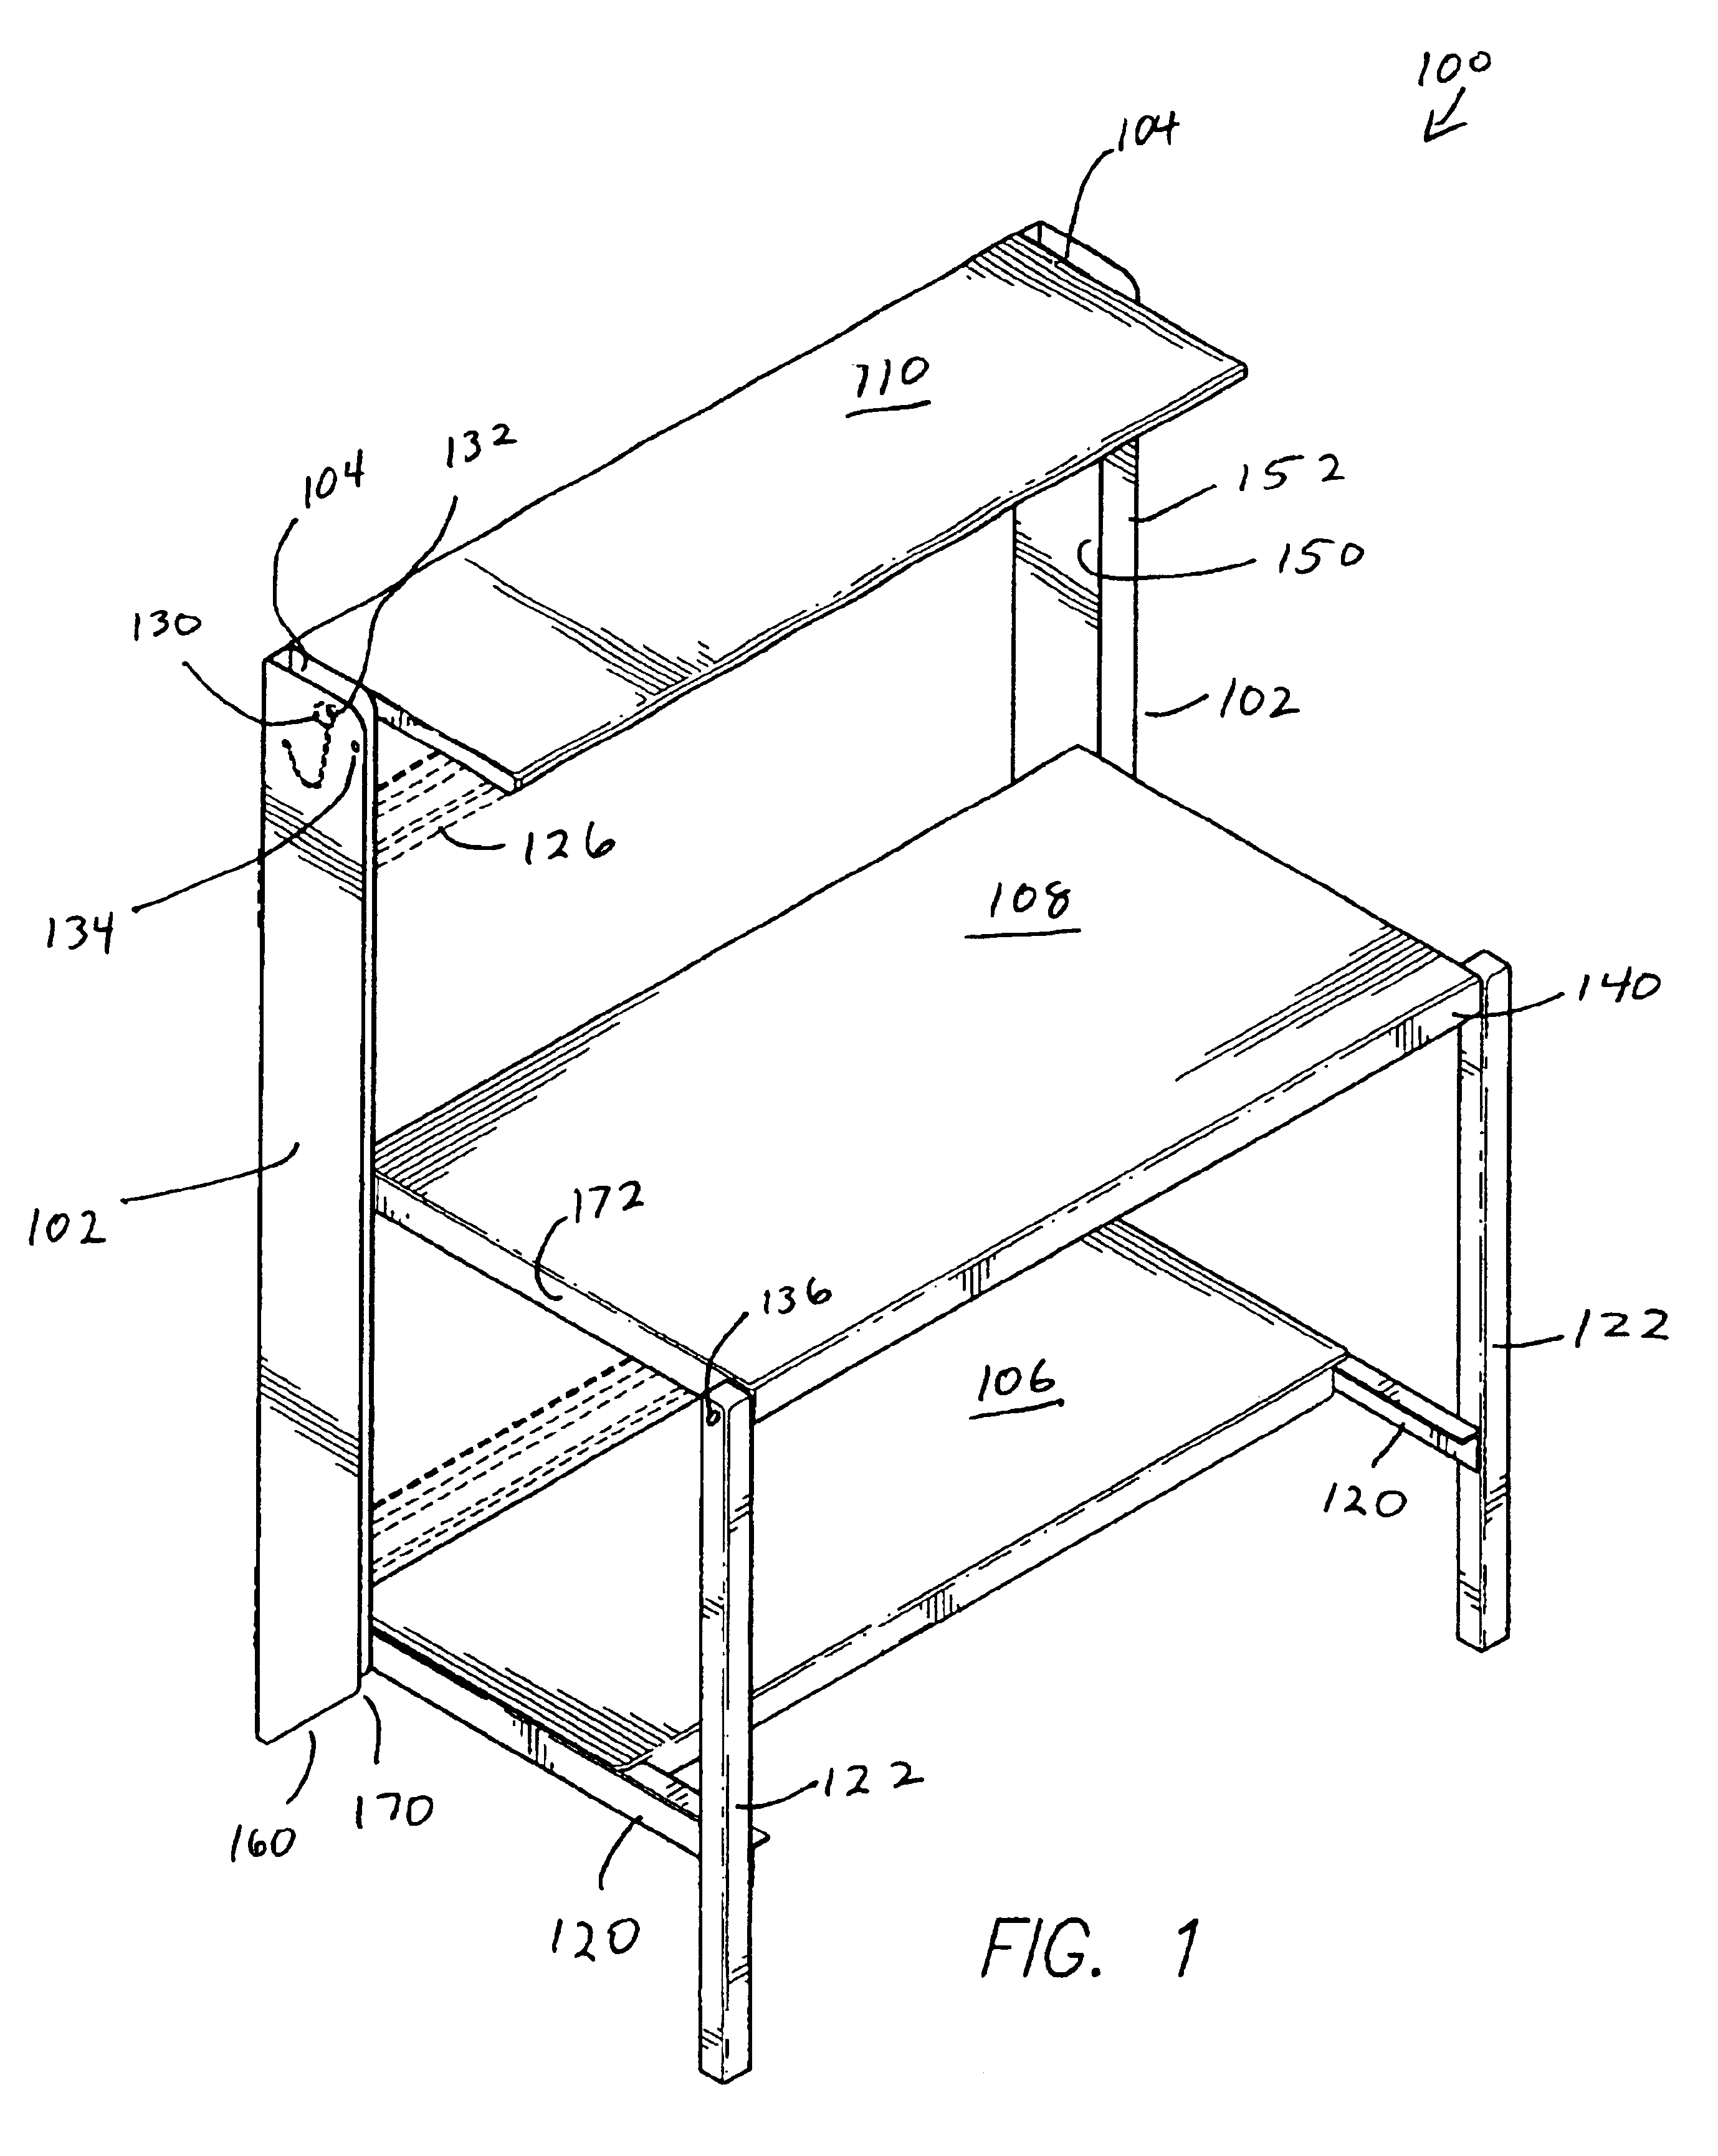 Foldable workstation and shelving system